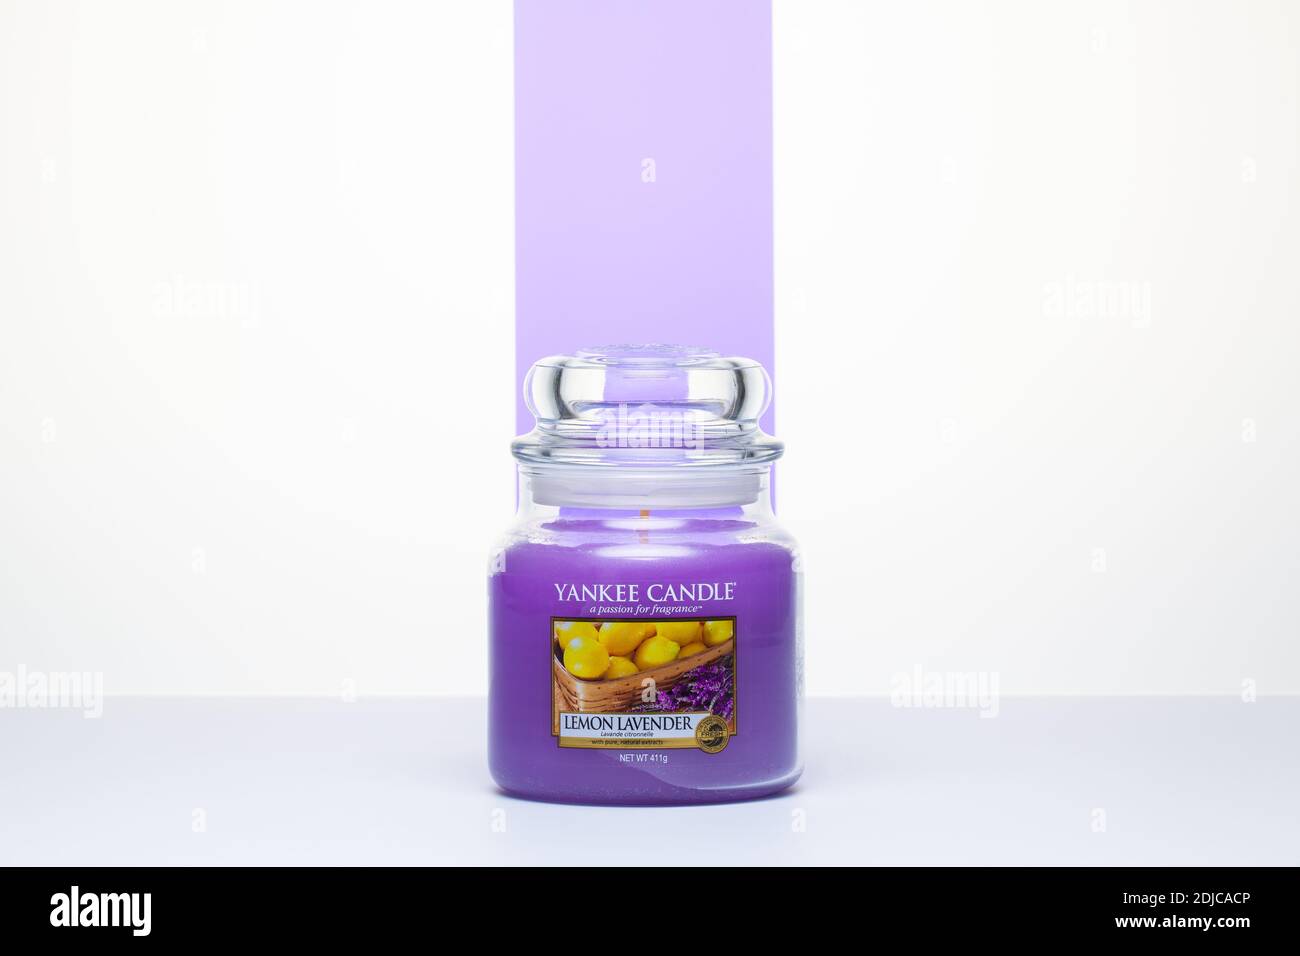 Prague,Czech Republic - 9 December,2020: Lemon lavender Yankee Candle on the white table. Yankee Candle, Americas best loved candle Stock Photo